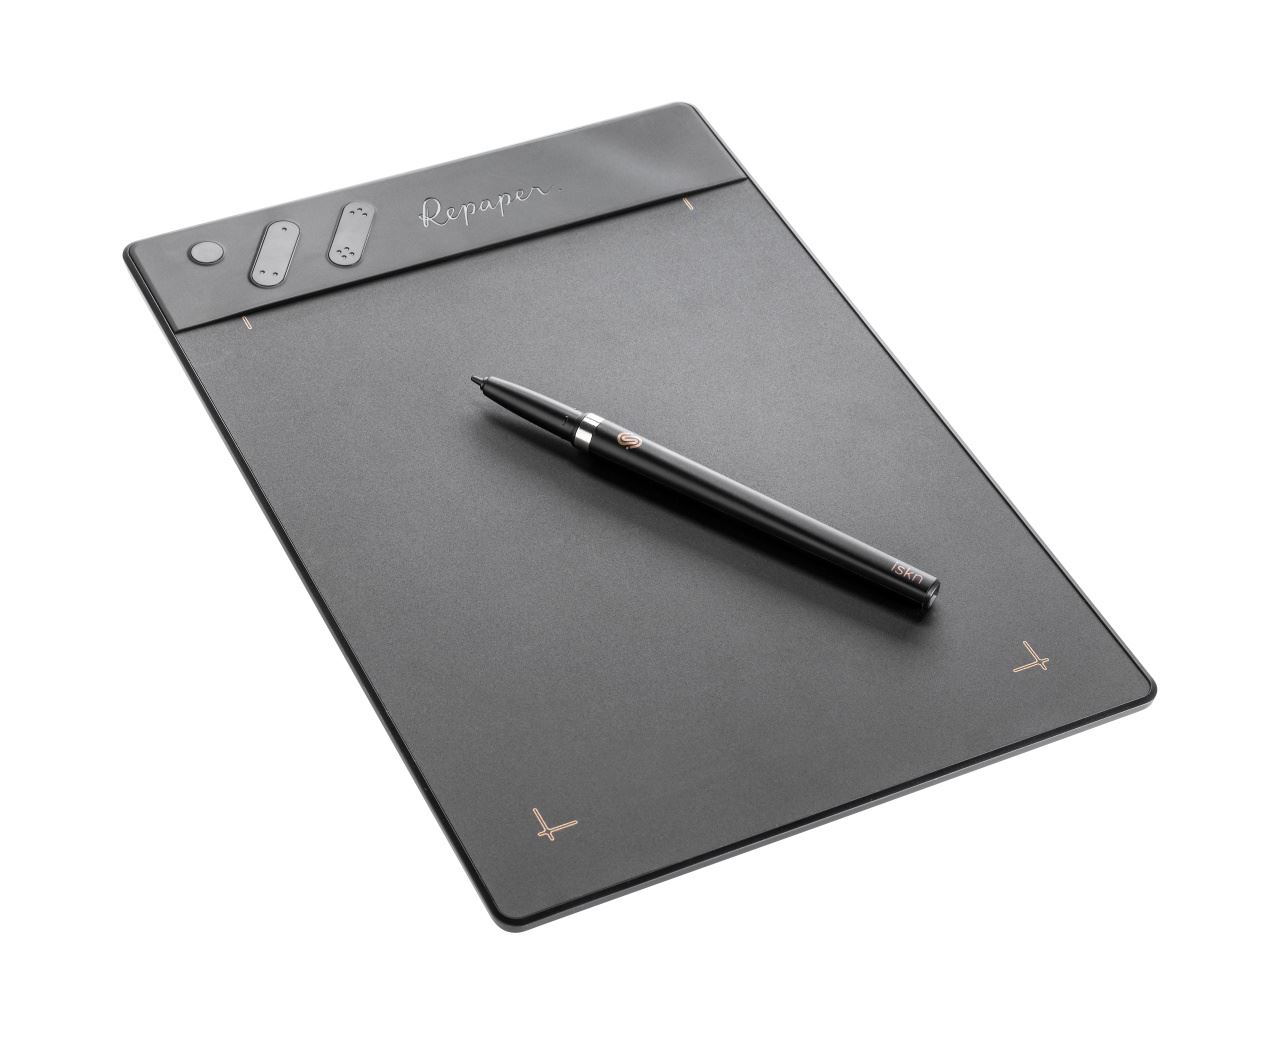 Faber-Castell - Repaper graphic tablet